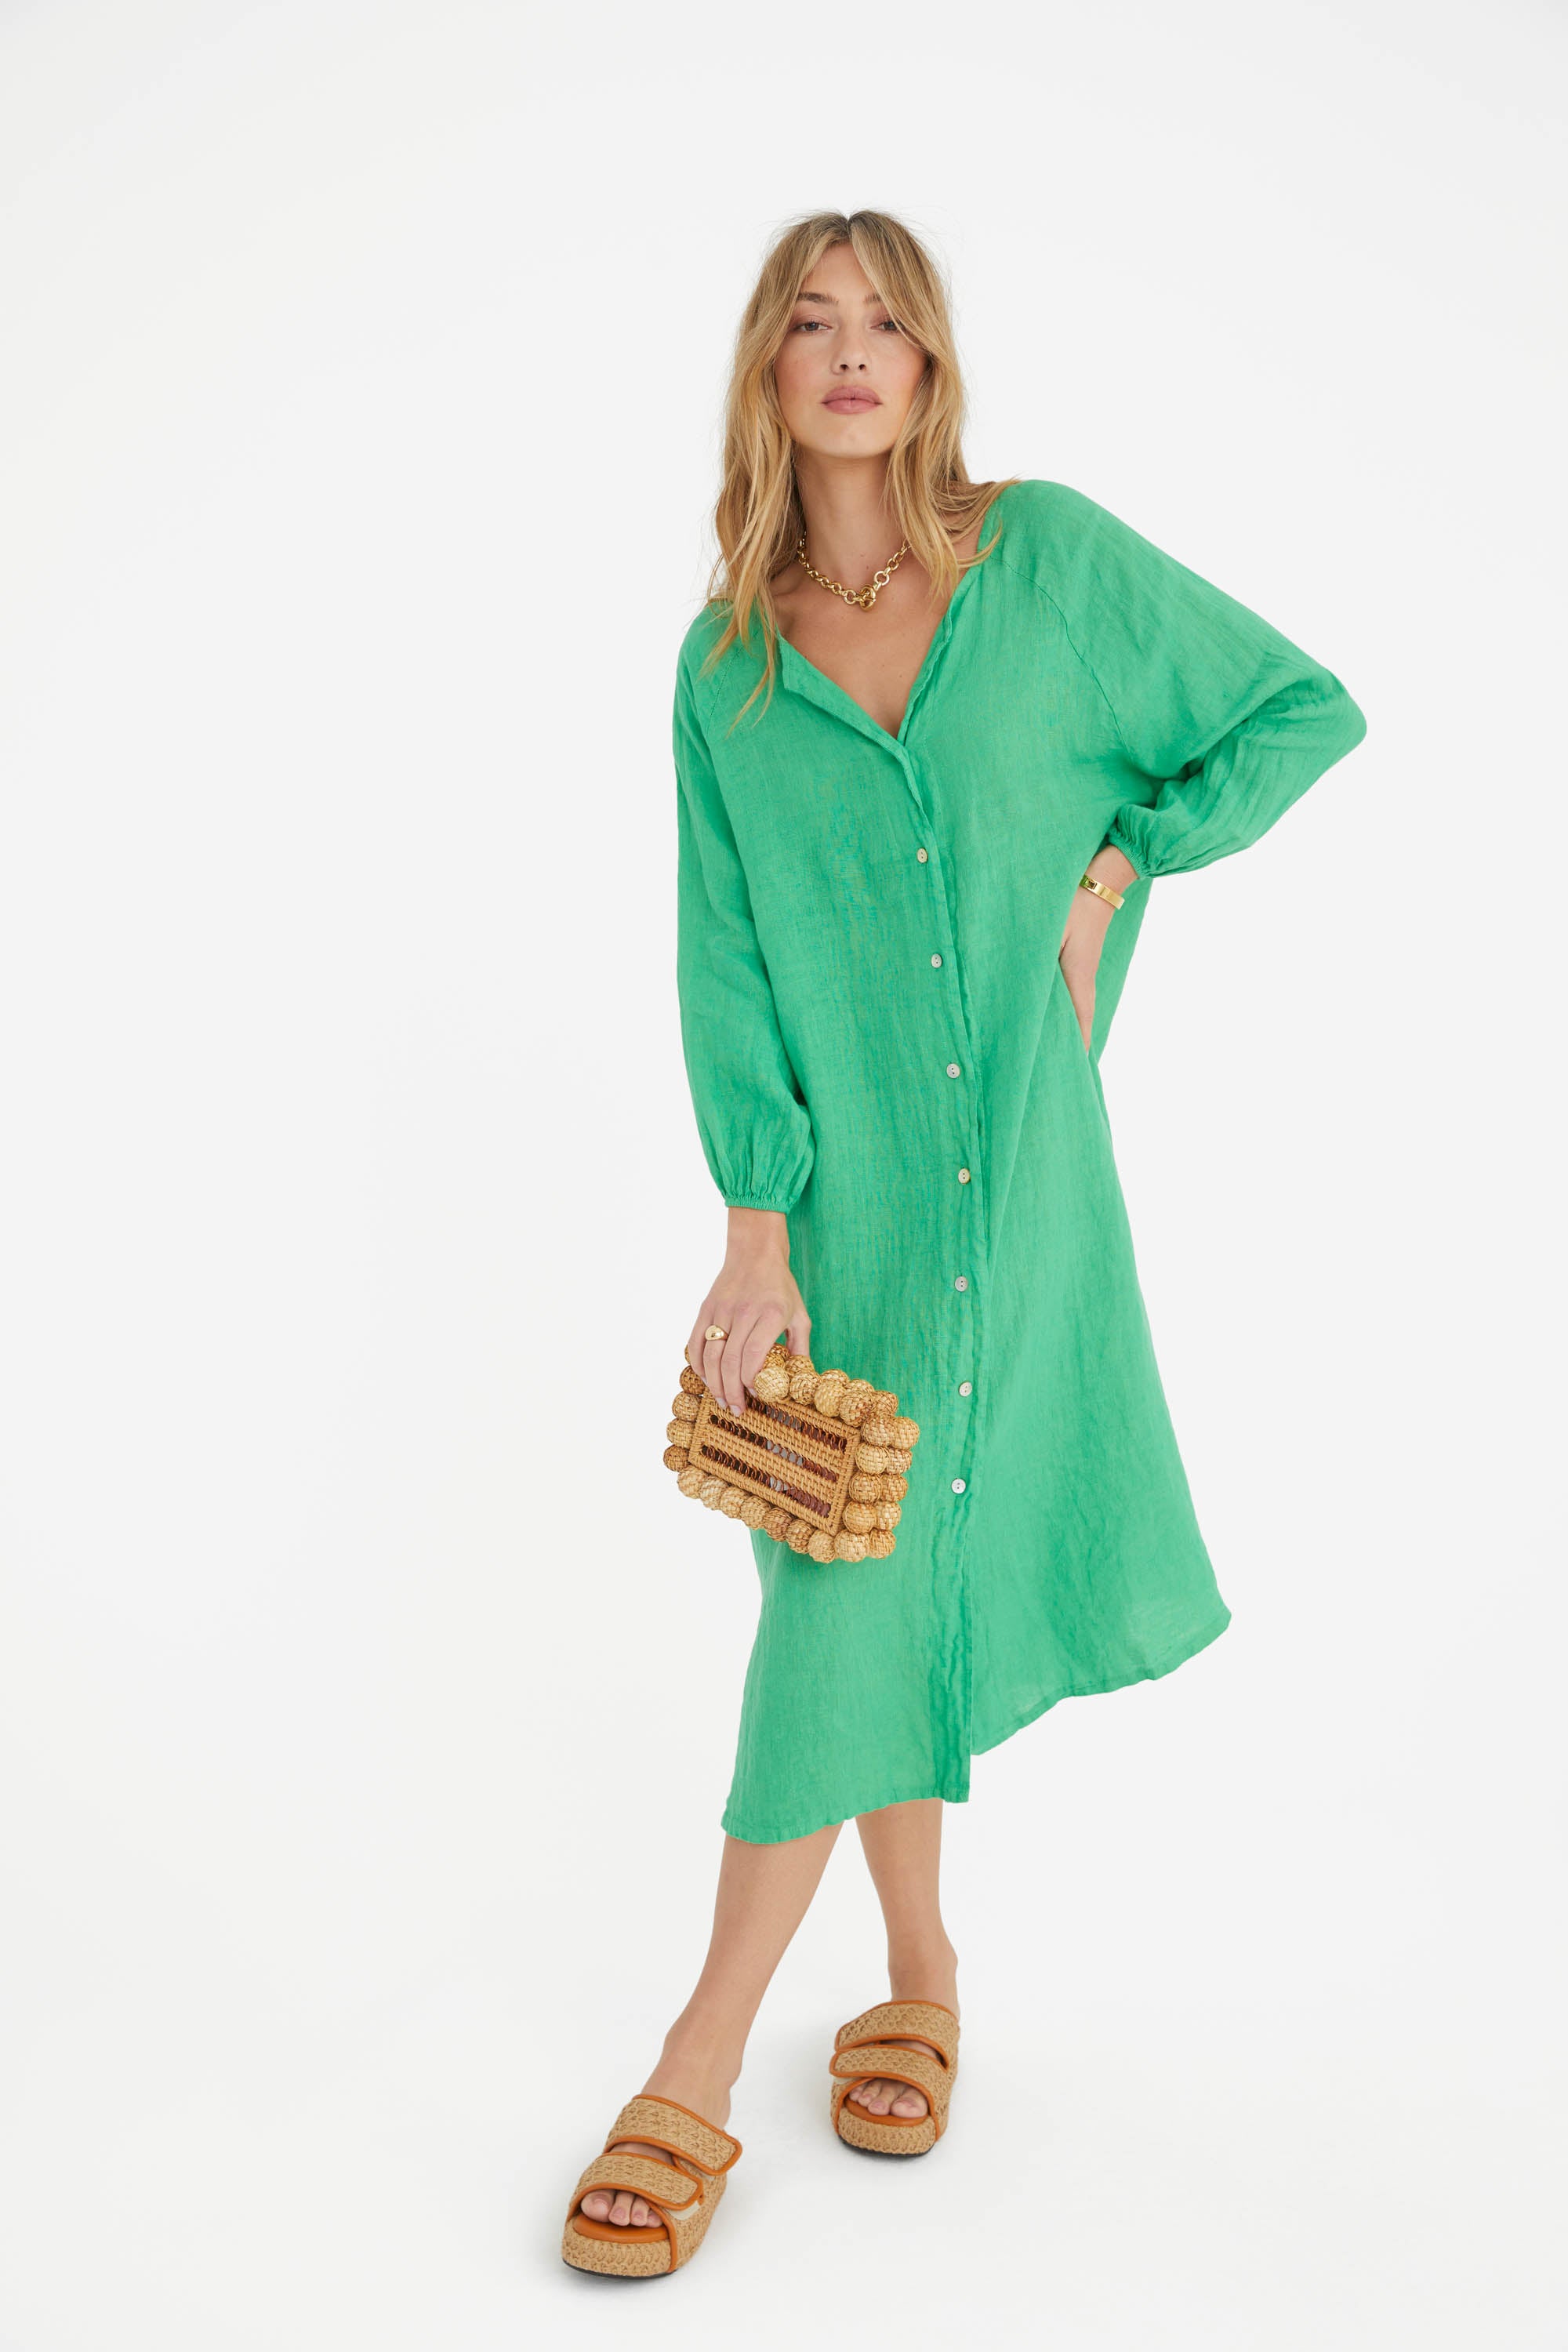 The Camille Dress in Vert